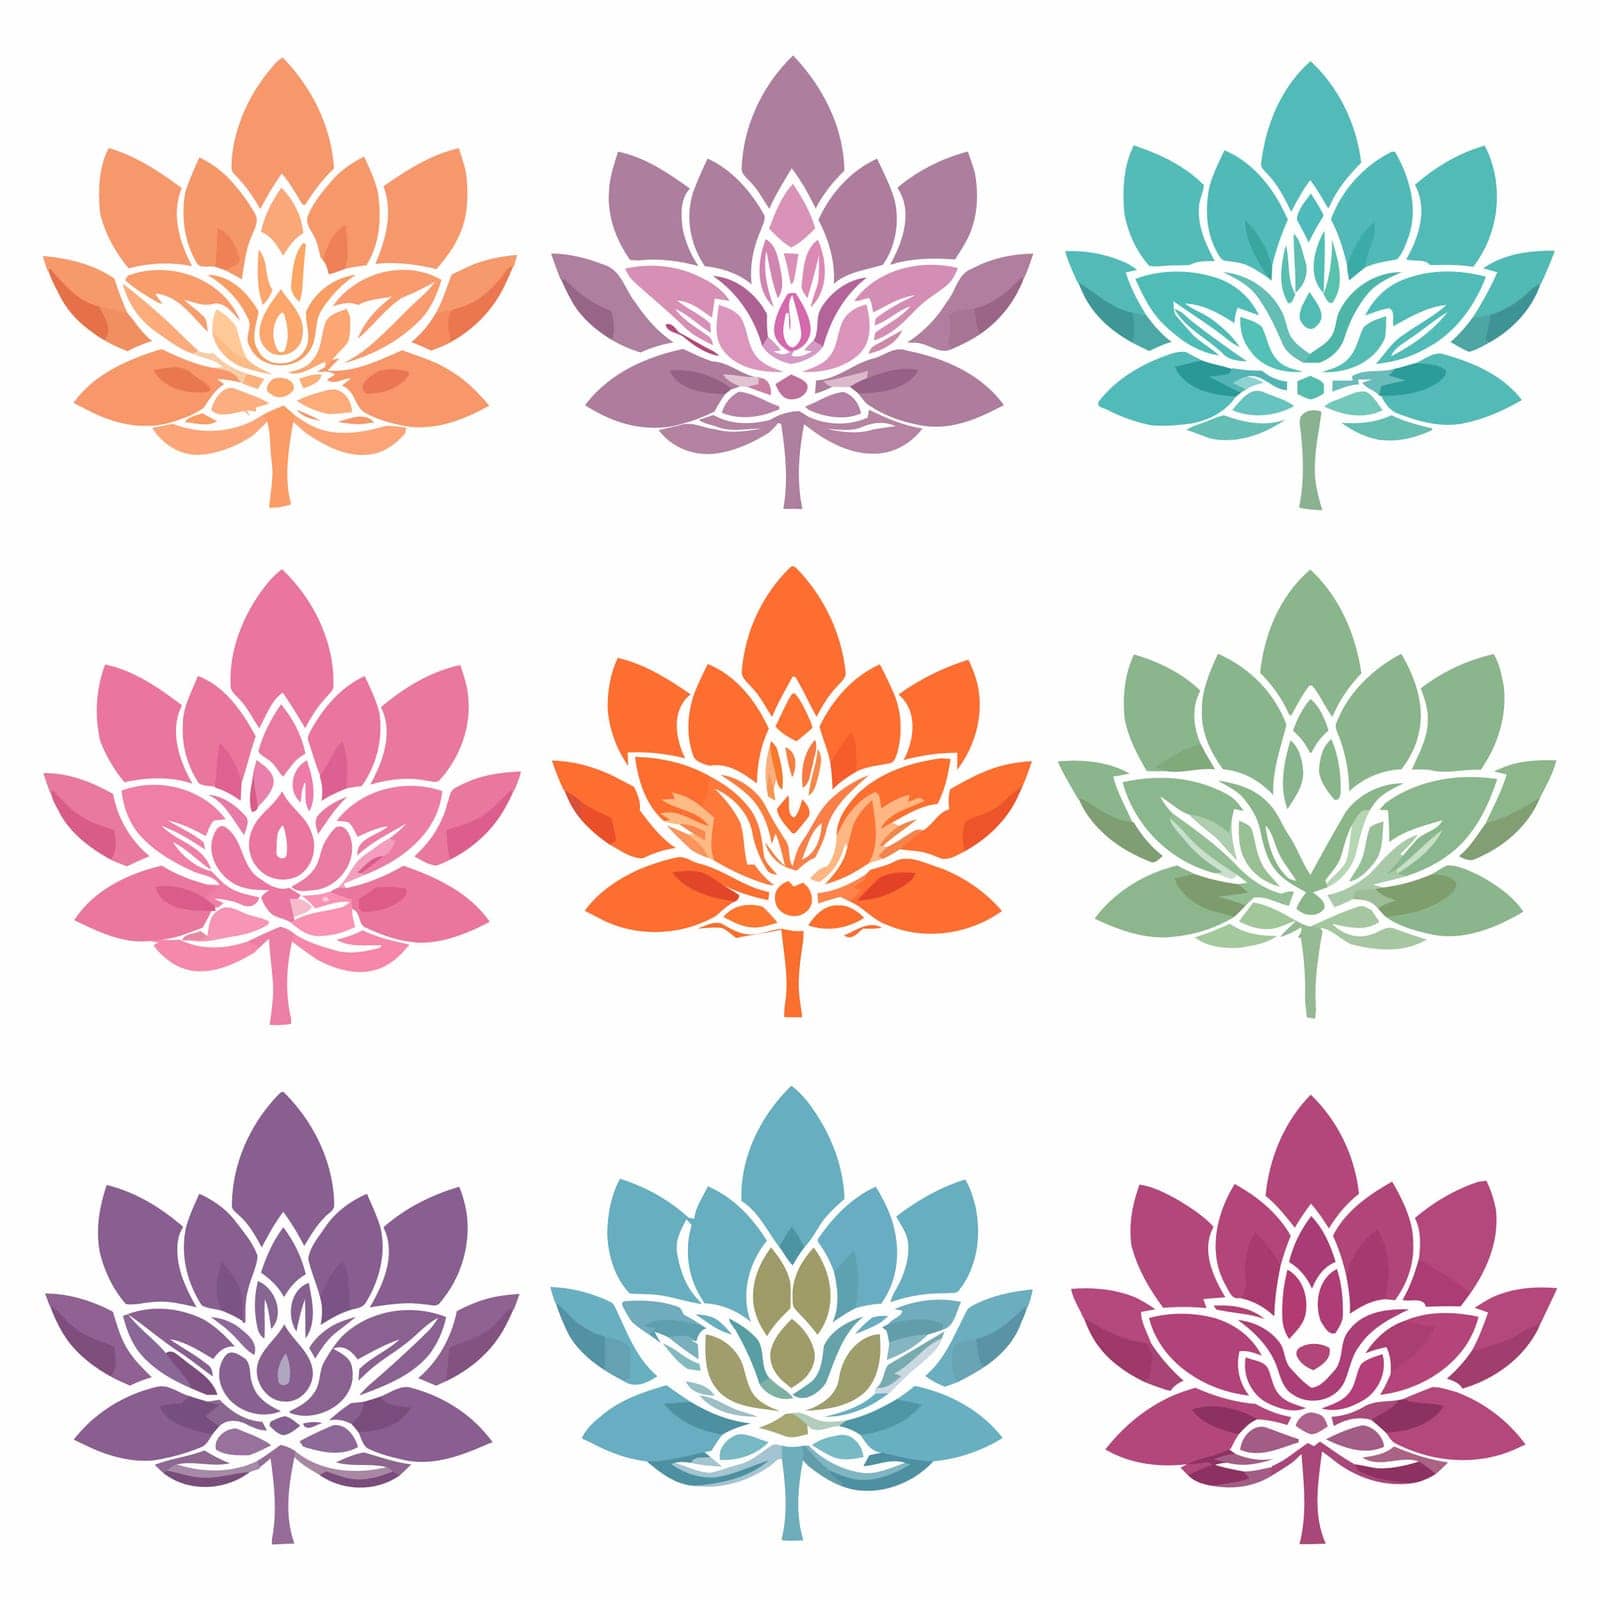 Flower icons set. Abstract colorful flowers on white background. Flower collection in flat design. Vector illustration